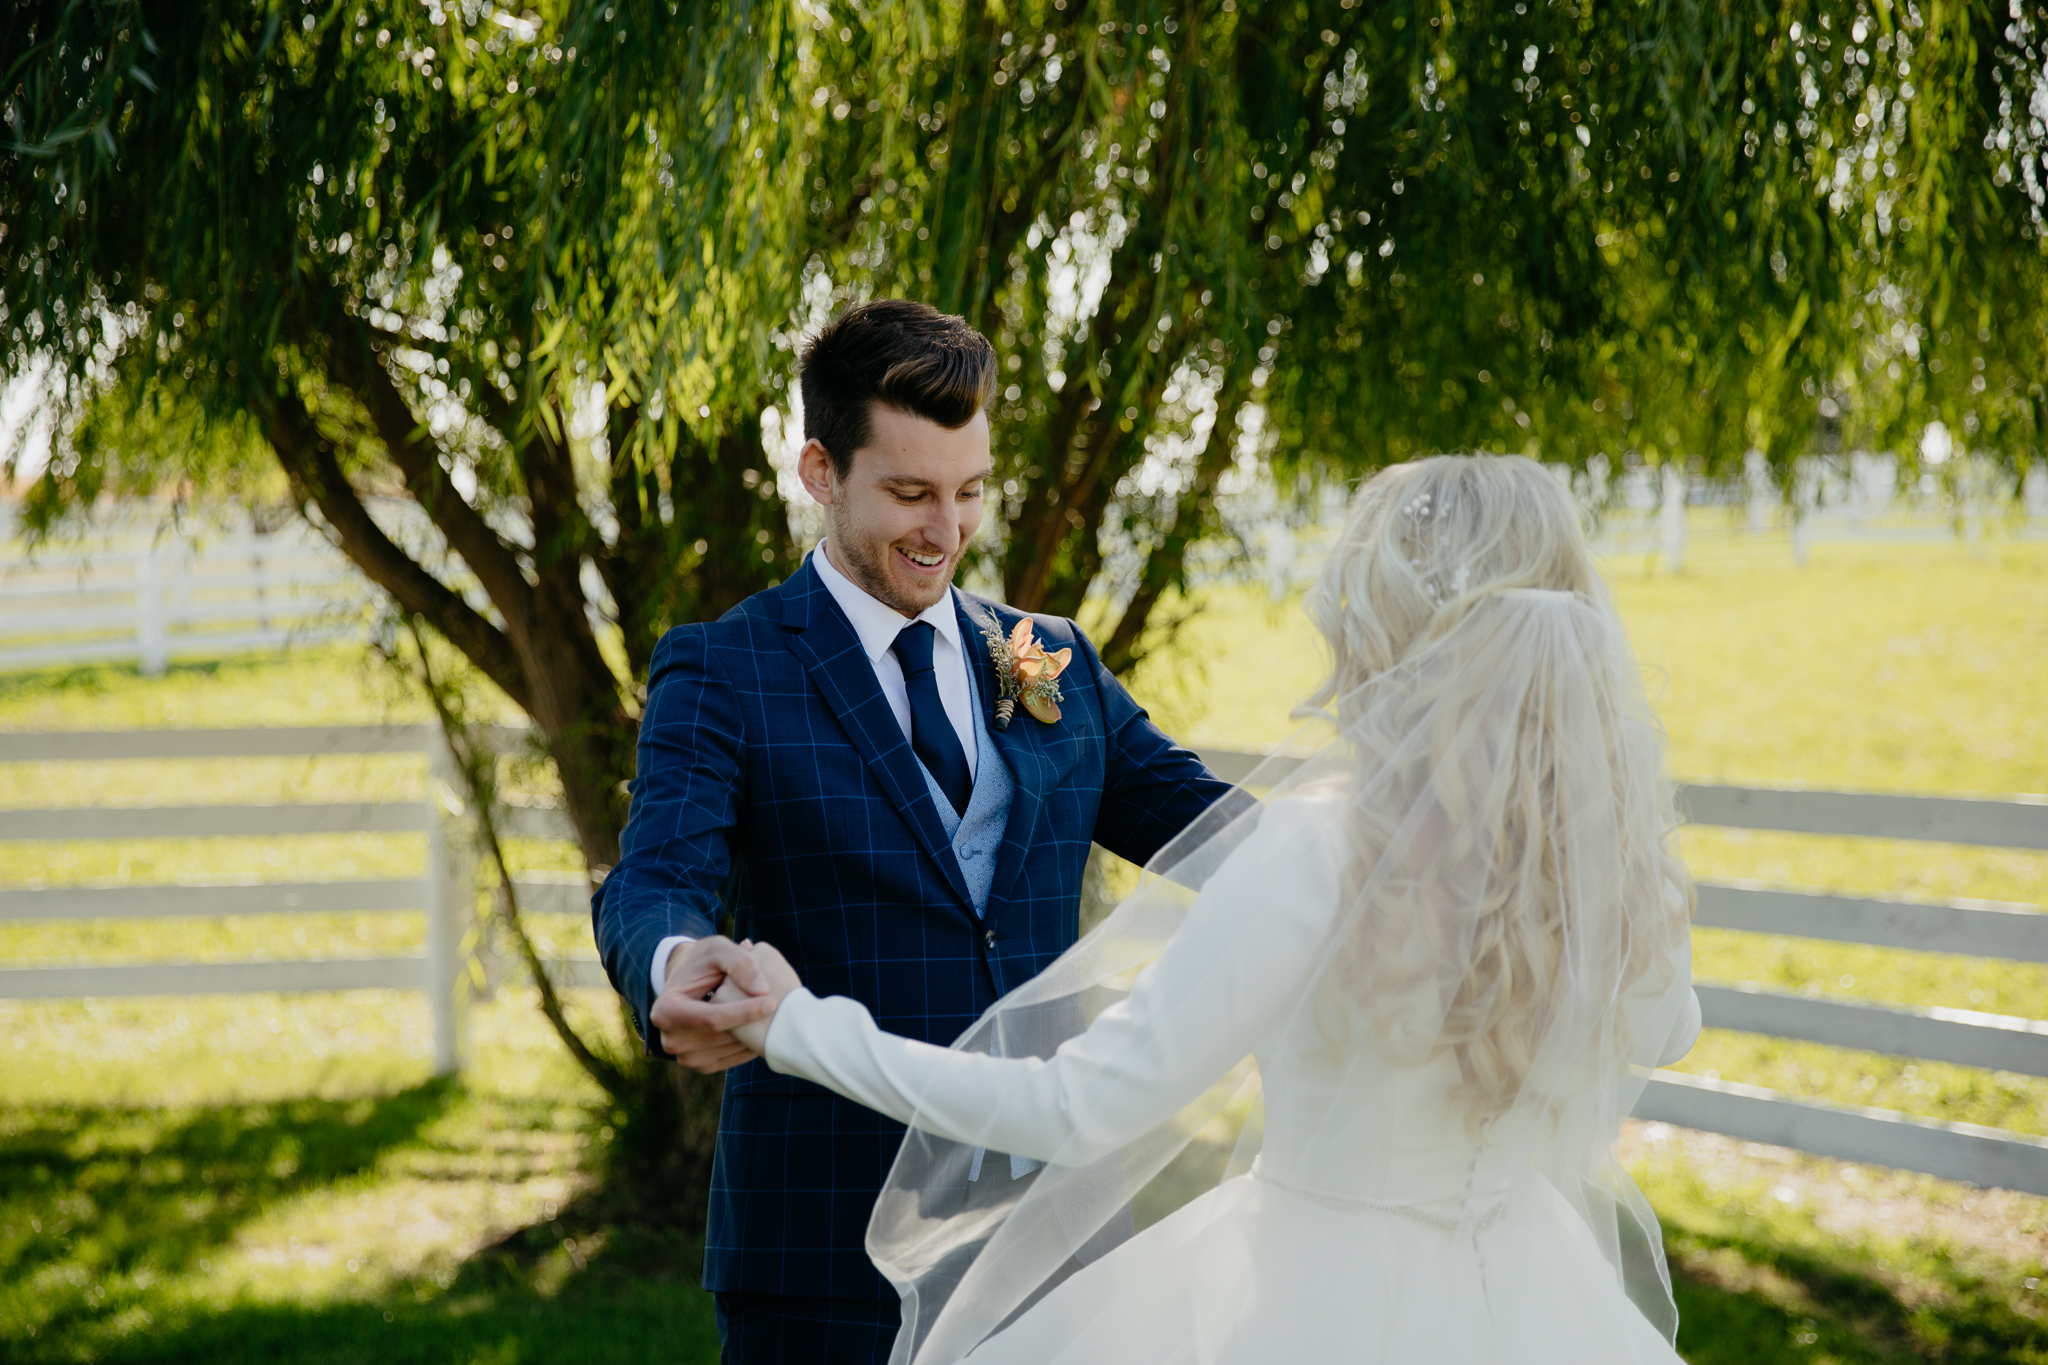 Groom admires his bride by a willow tree